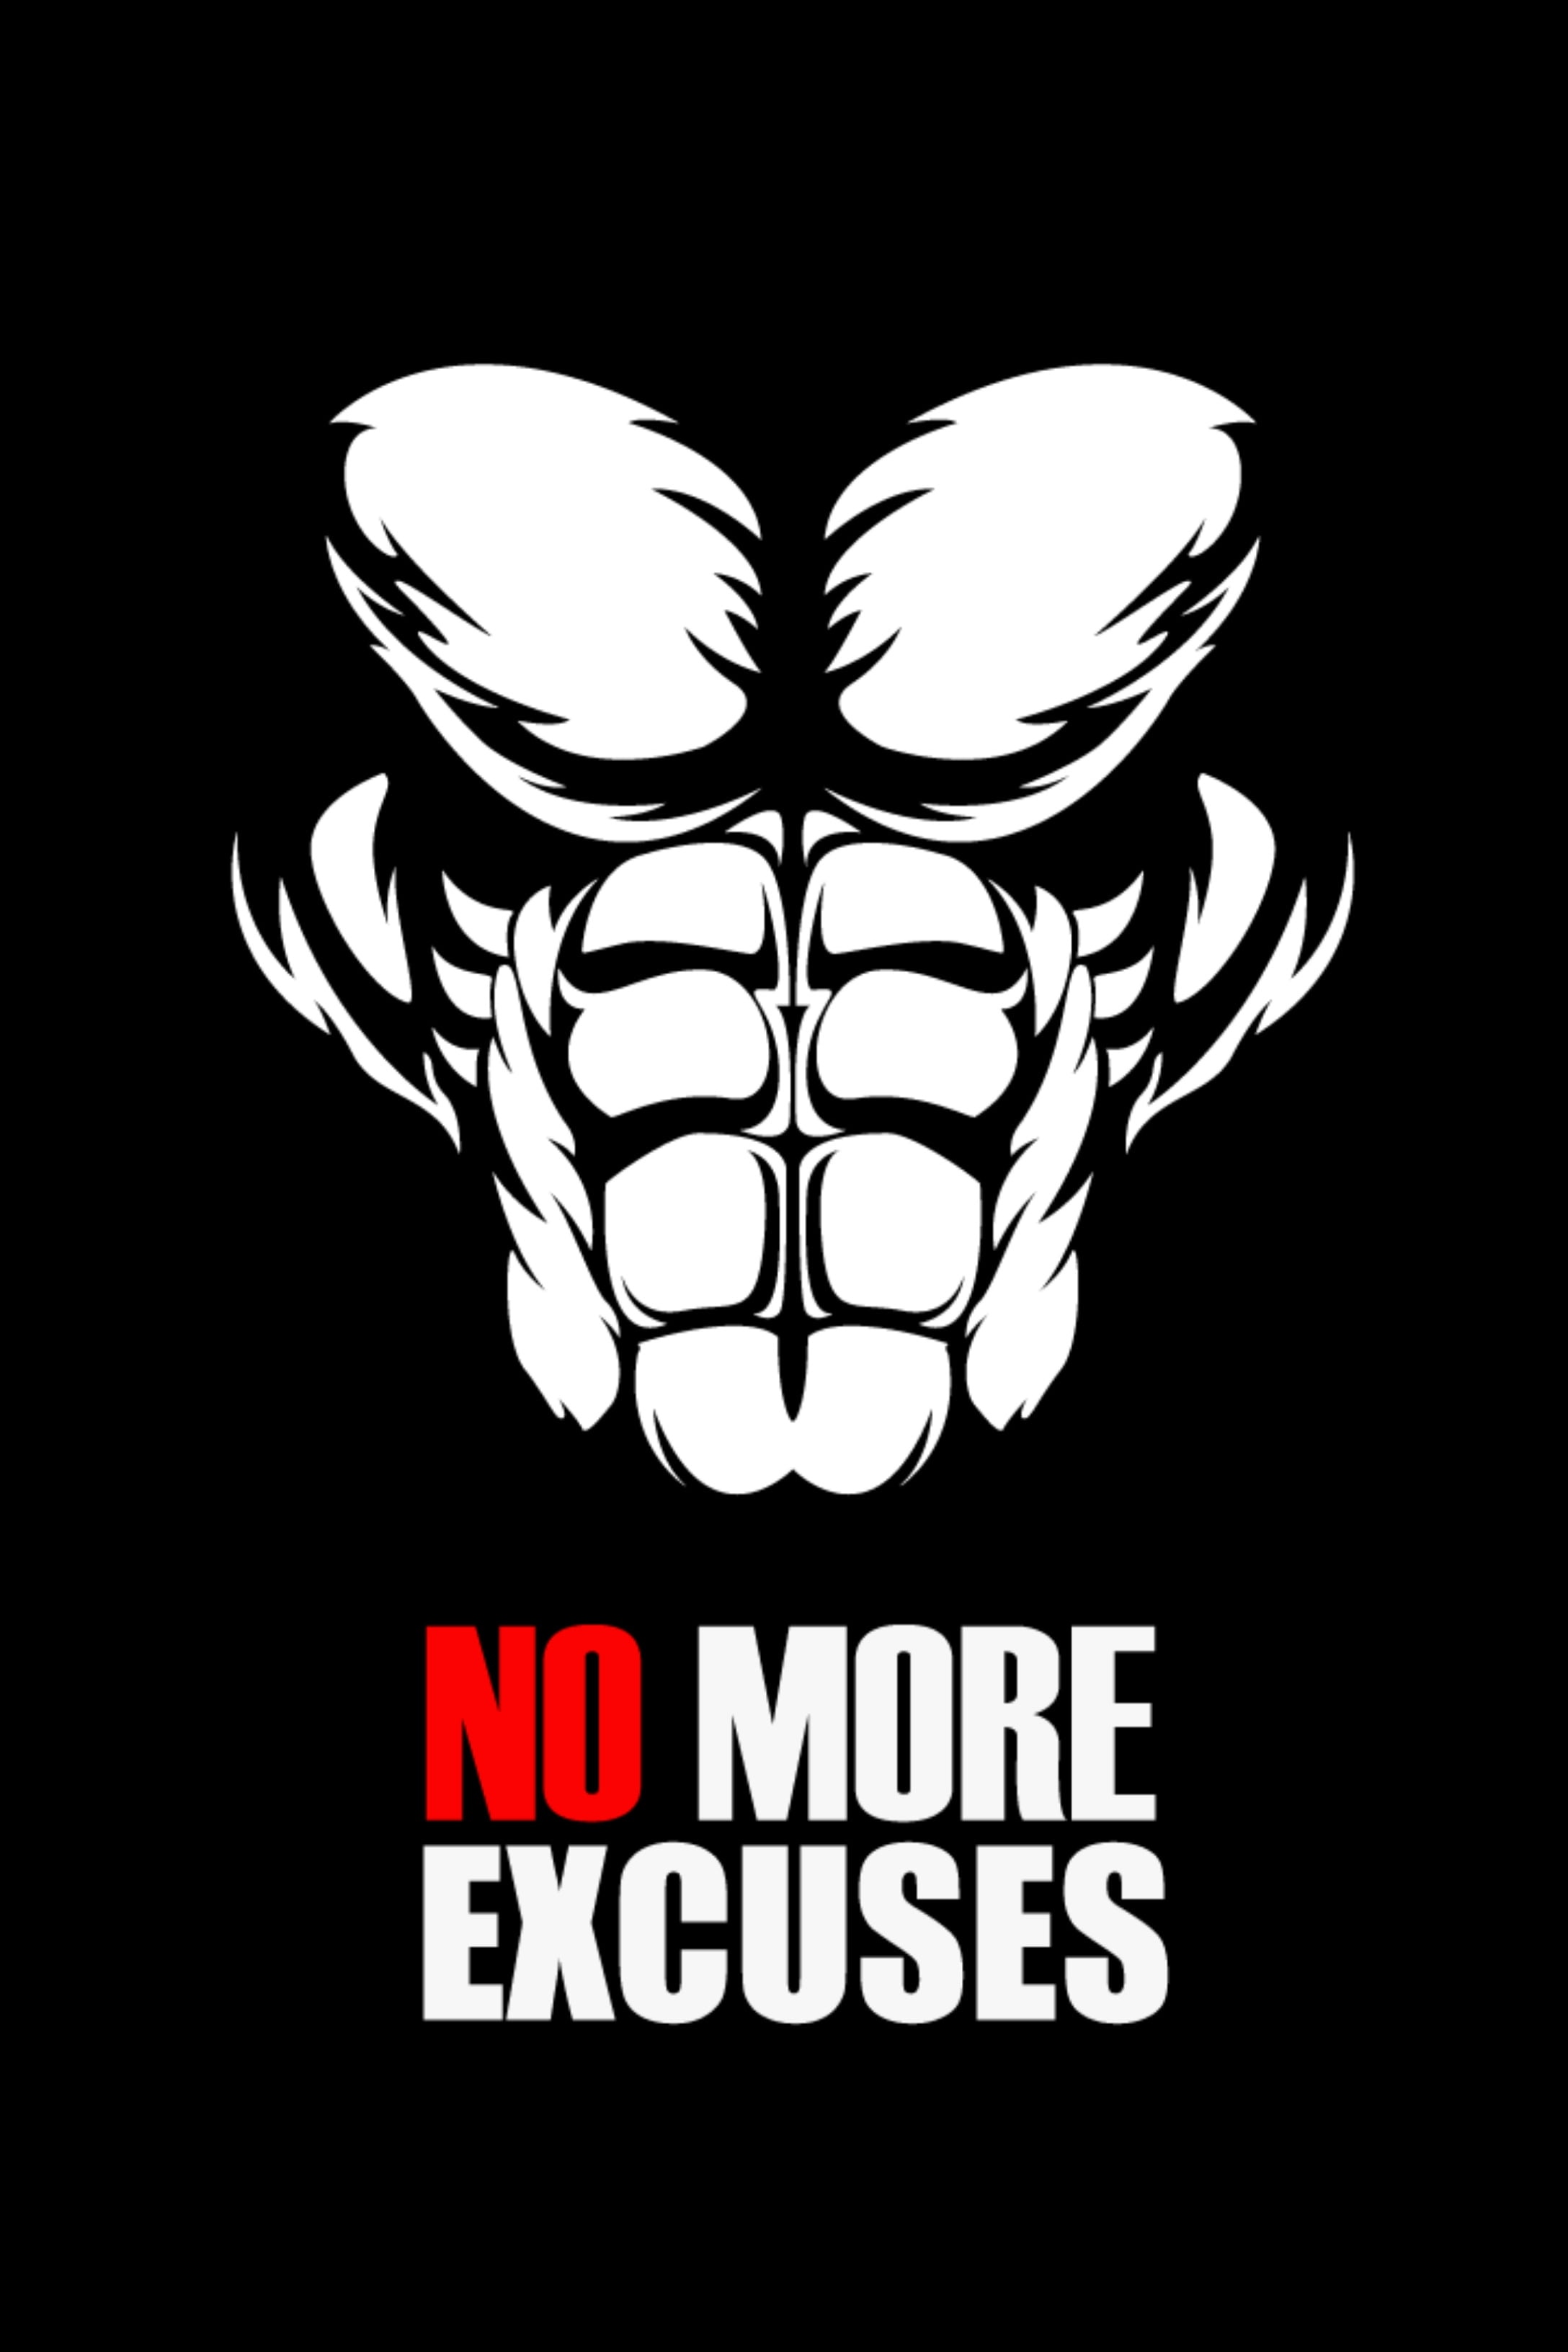 Gym Lover - no more excuses